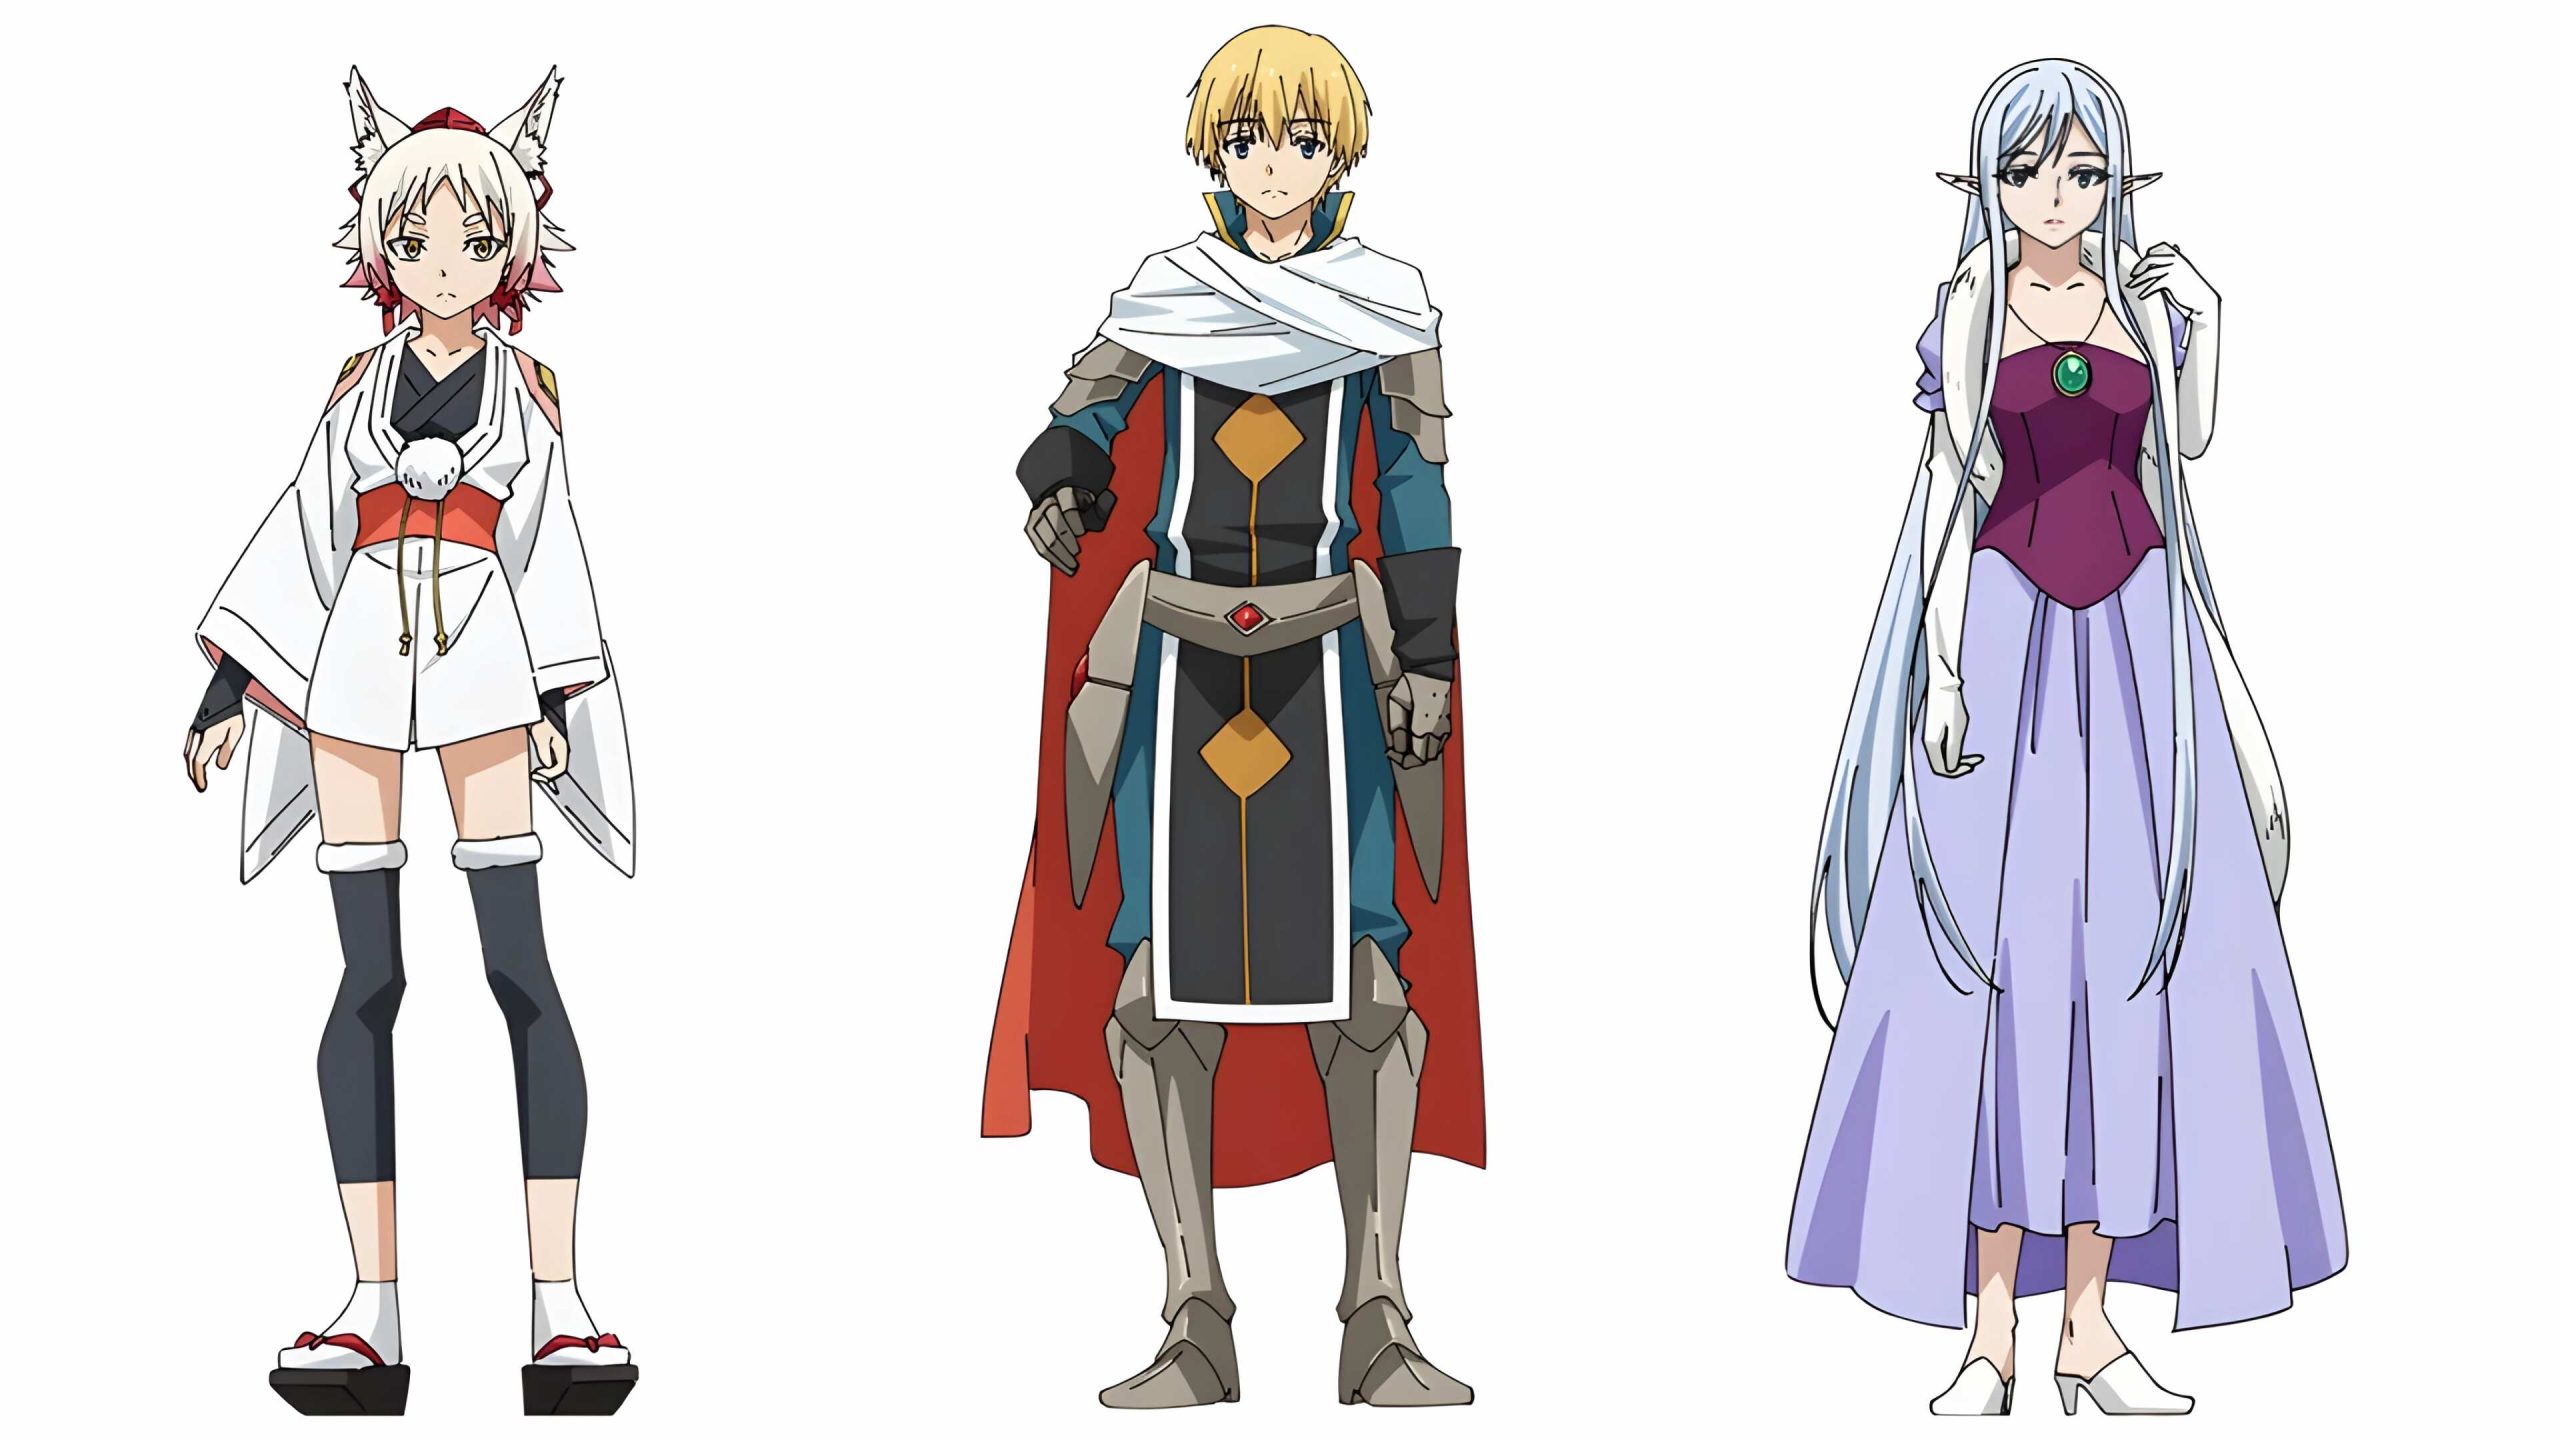 The New Additions To The Characters For The Monster Capital Opening Festival Arc - Momiji, Masayuki, And Elmesia (8bit)